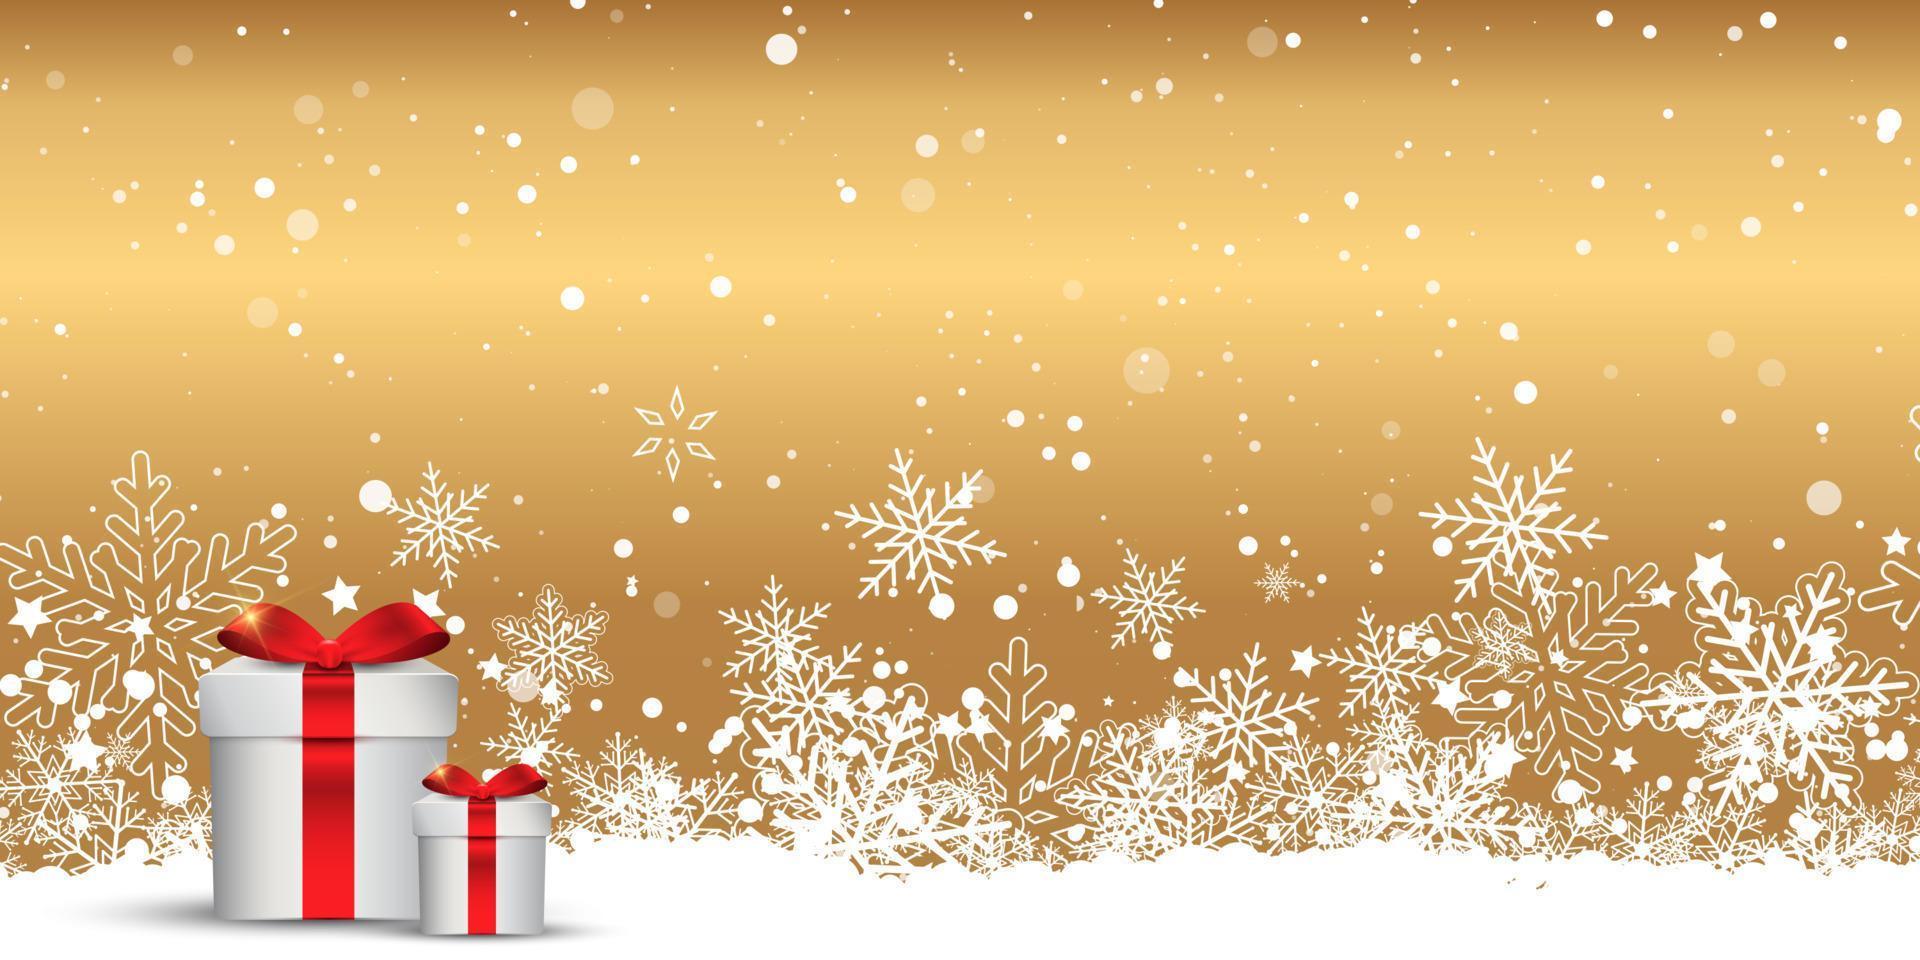 Christmas banner with gift boxes vector